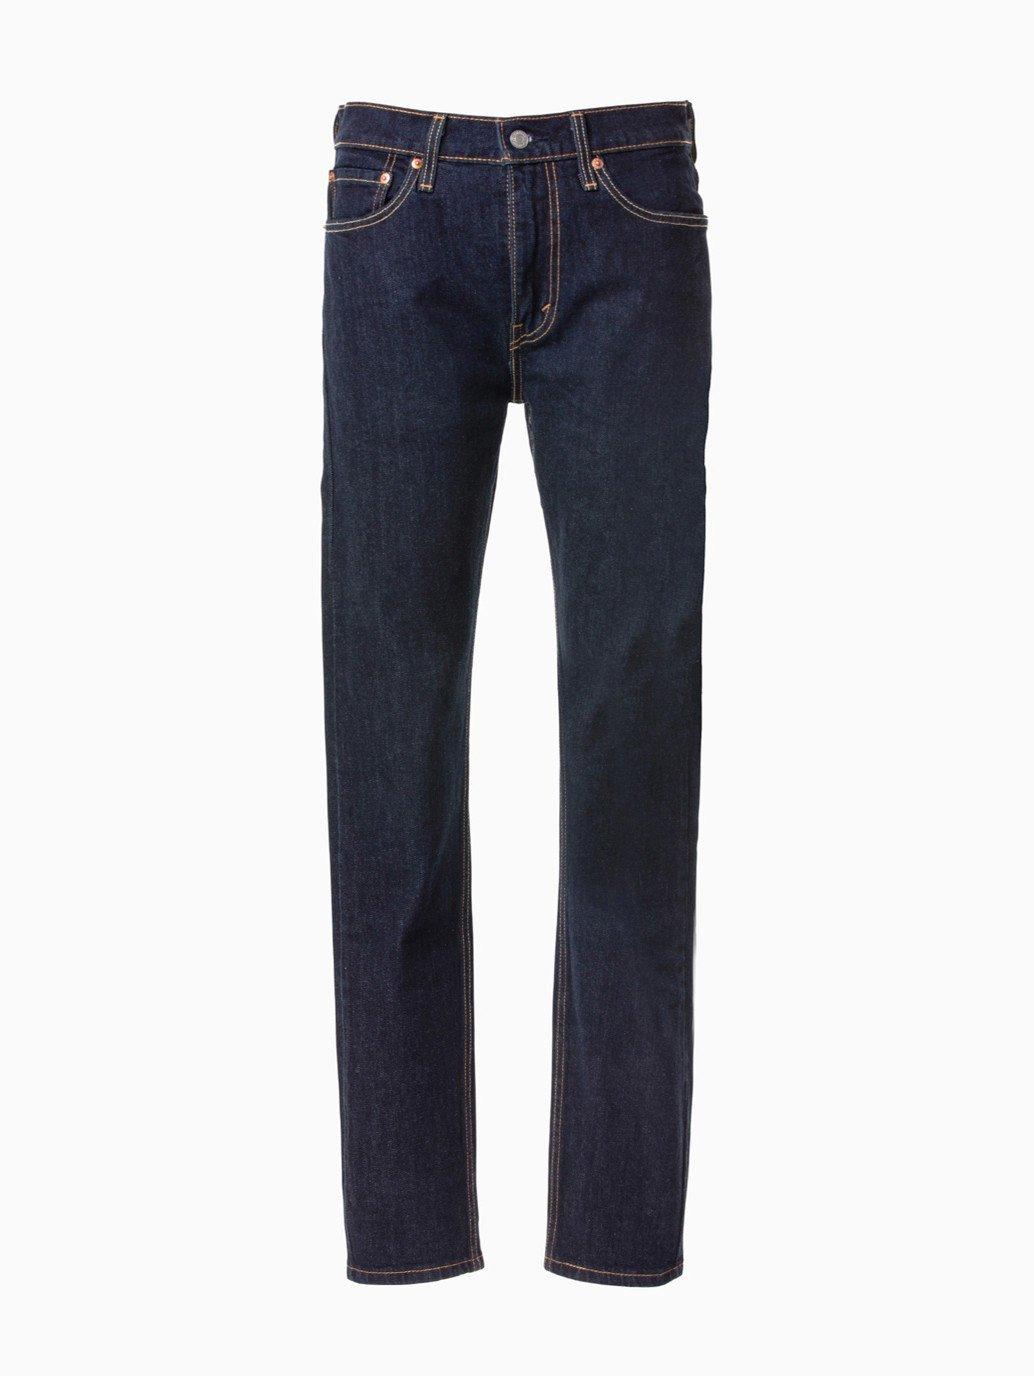 Buy 510™ Skinny Fit Jeans | Levi's® Official Online Store SG